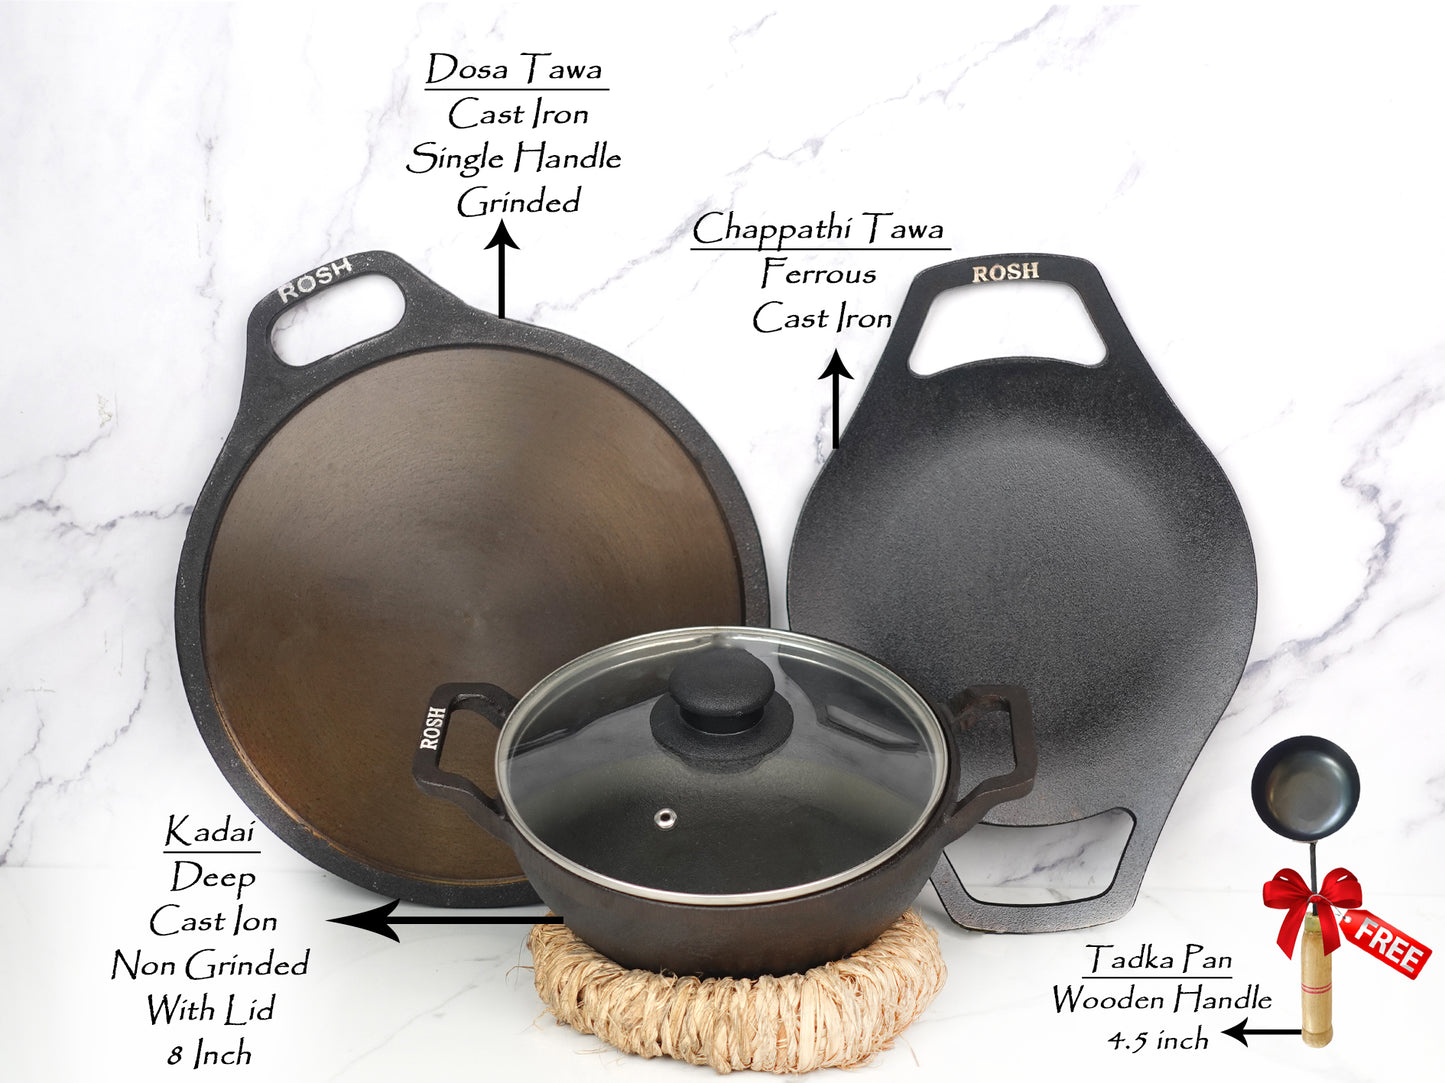 Combo Offer  -16 - Dosa Tawa - Cast Iron - Single Handle - Grinded - Chappathi Tawa Ferrous - Cast Iron -  Deep Kadai Cast Iron - Non Grinded - 8 Inch Dia - With Lid .